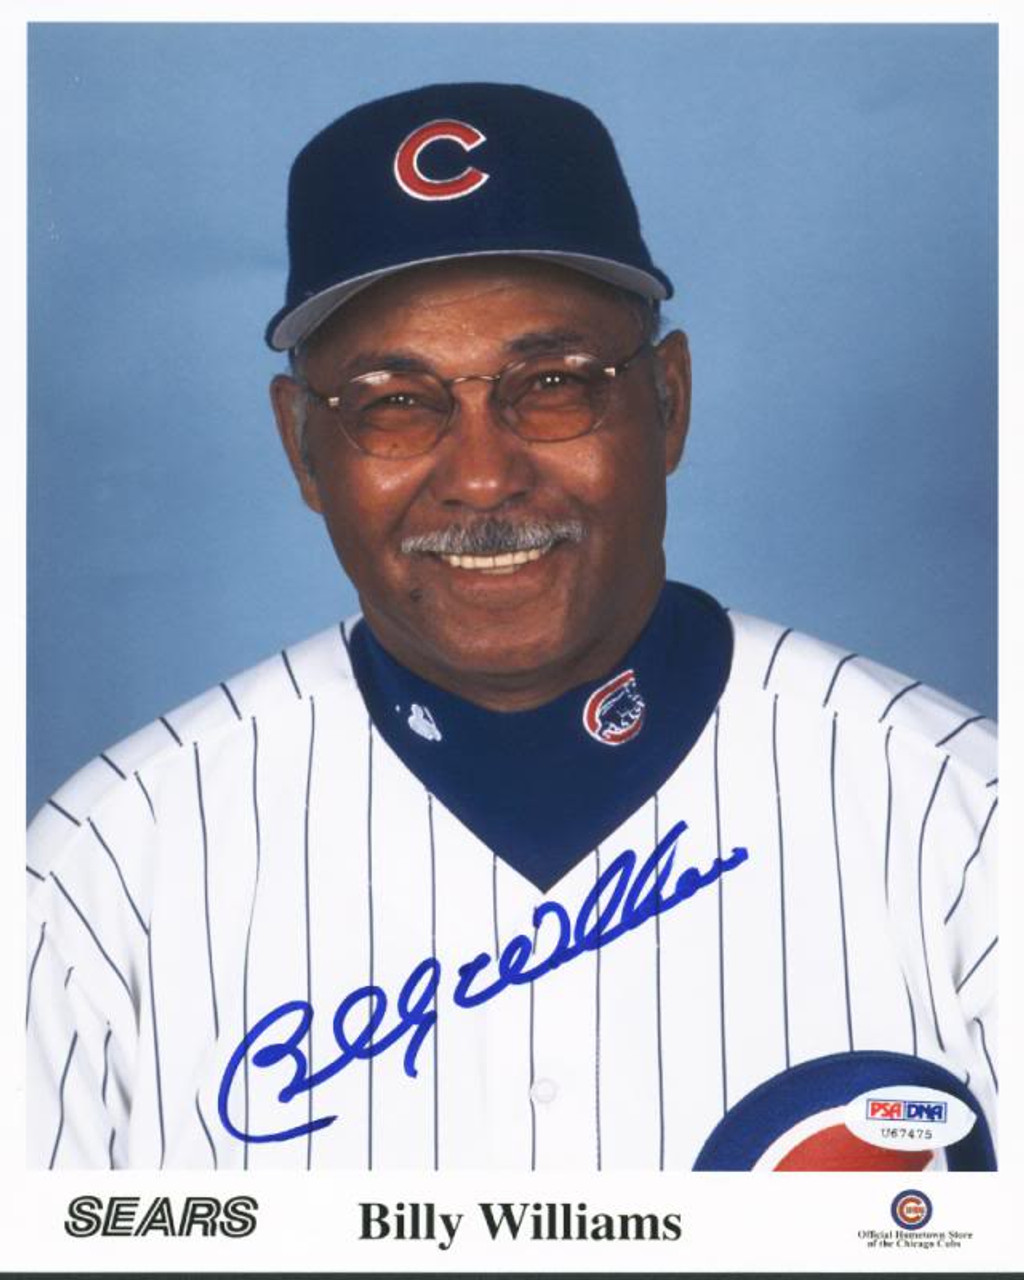 Billy Williams Signed Autograph 8x10 Photo - Chicago Cubs